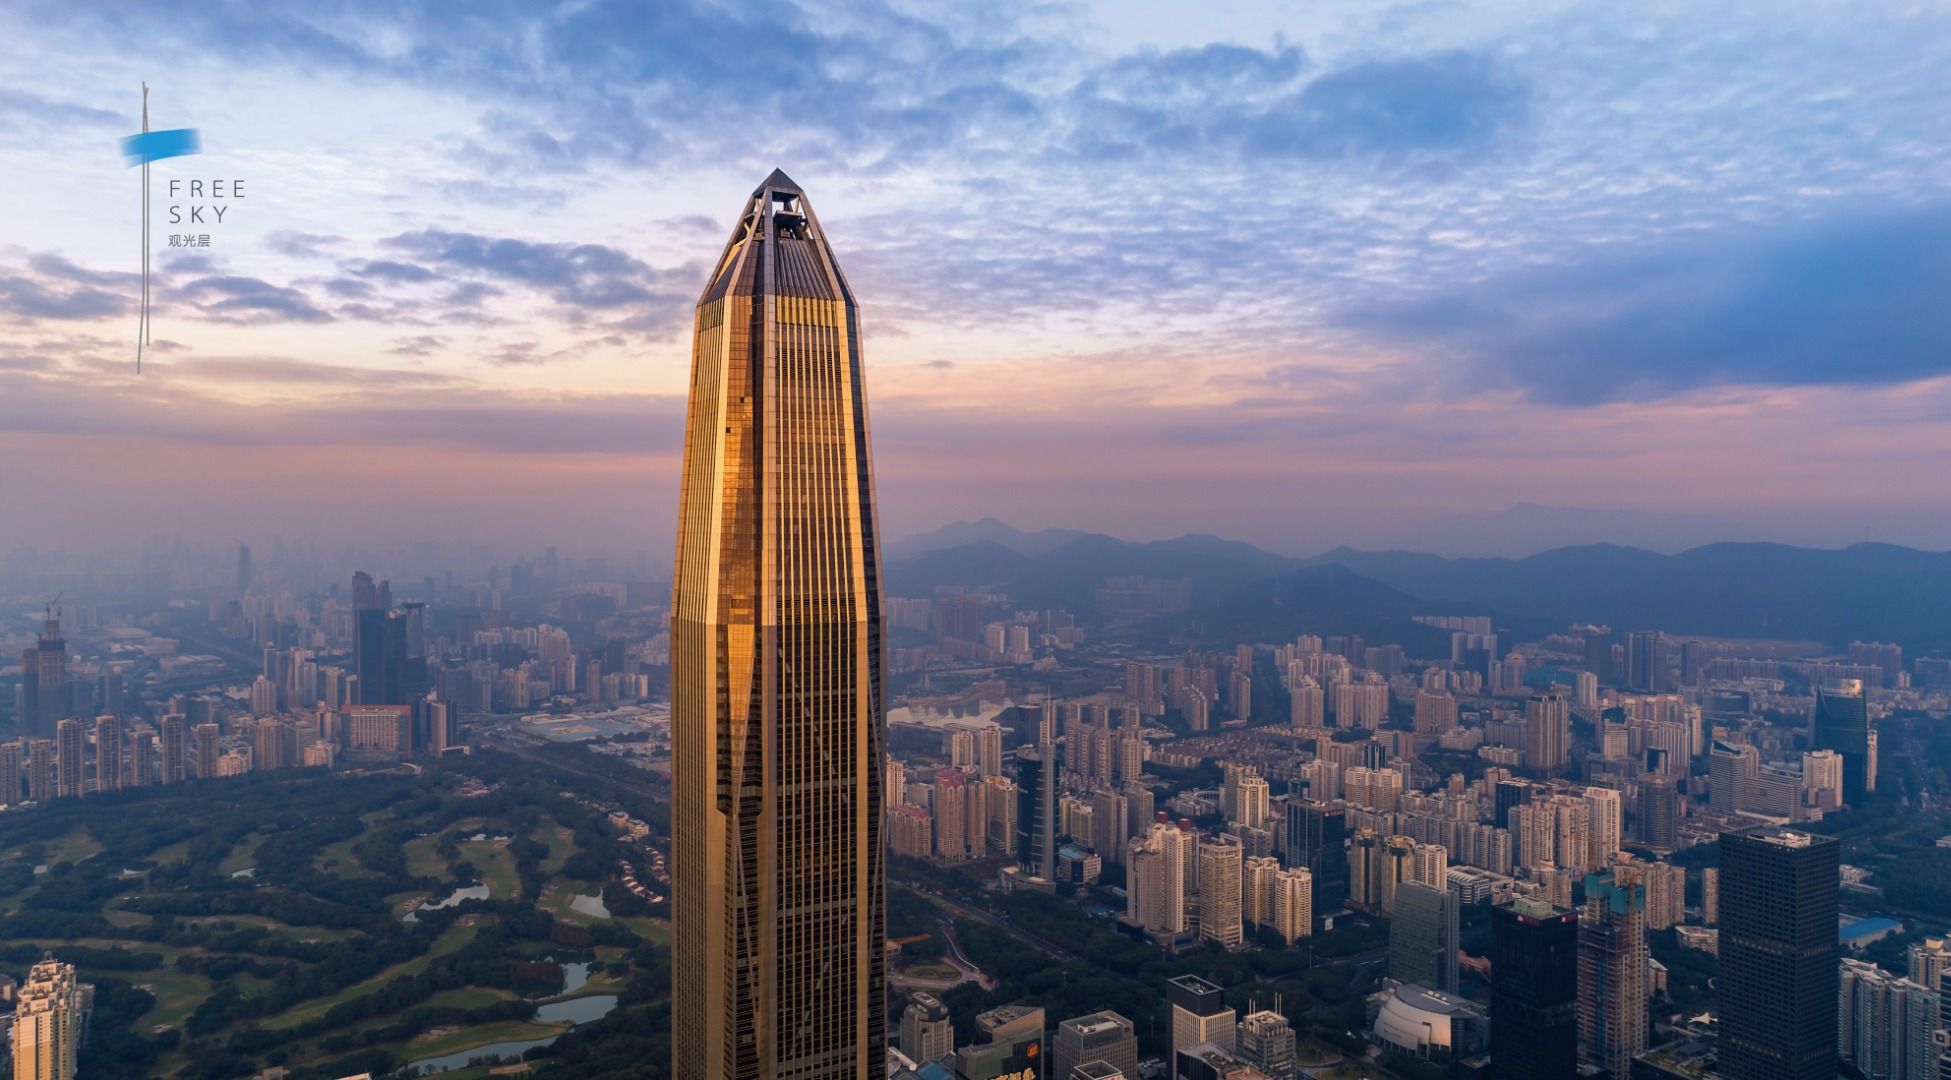 Imagen del tour: 【Exclusive Deal】Ping An Finance Centre 'Free Sky 116' Observation Deck in Shenzhen